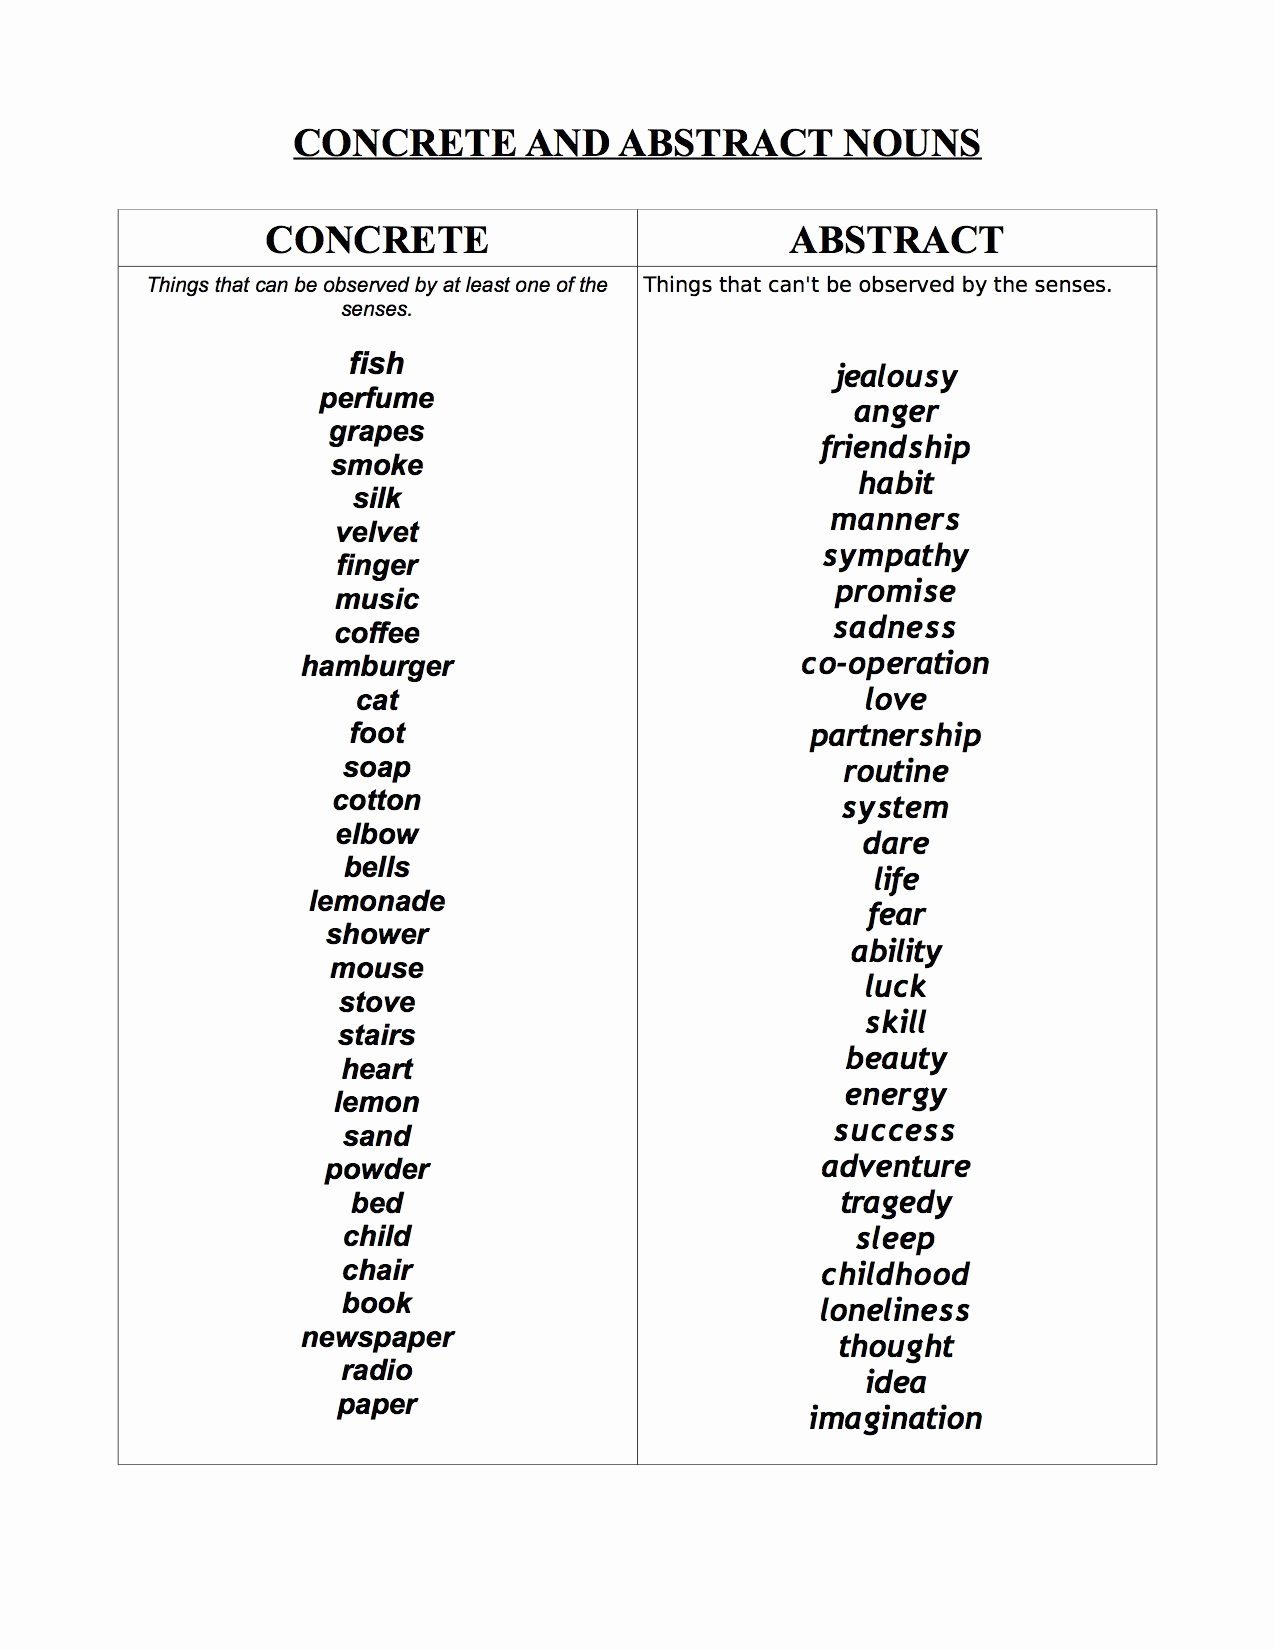 Concrete and Abstract Nouns Worksheet Awesome Concrete and Abstract Nouns Print Out A Concrete and